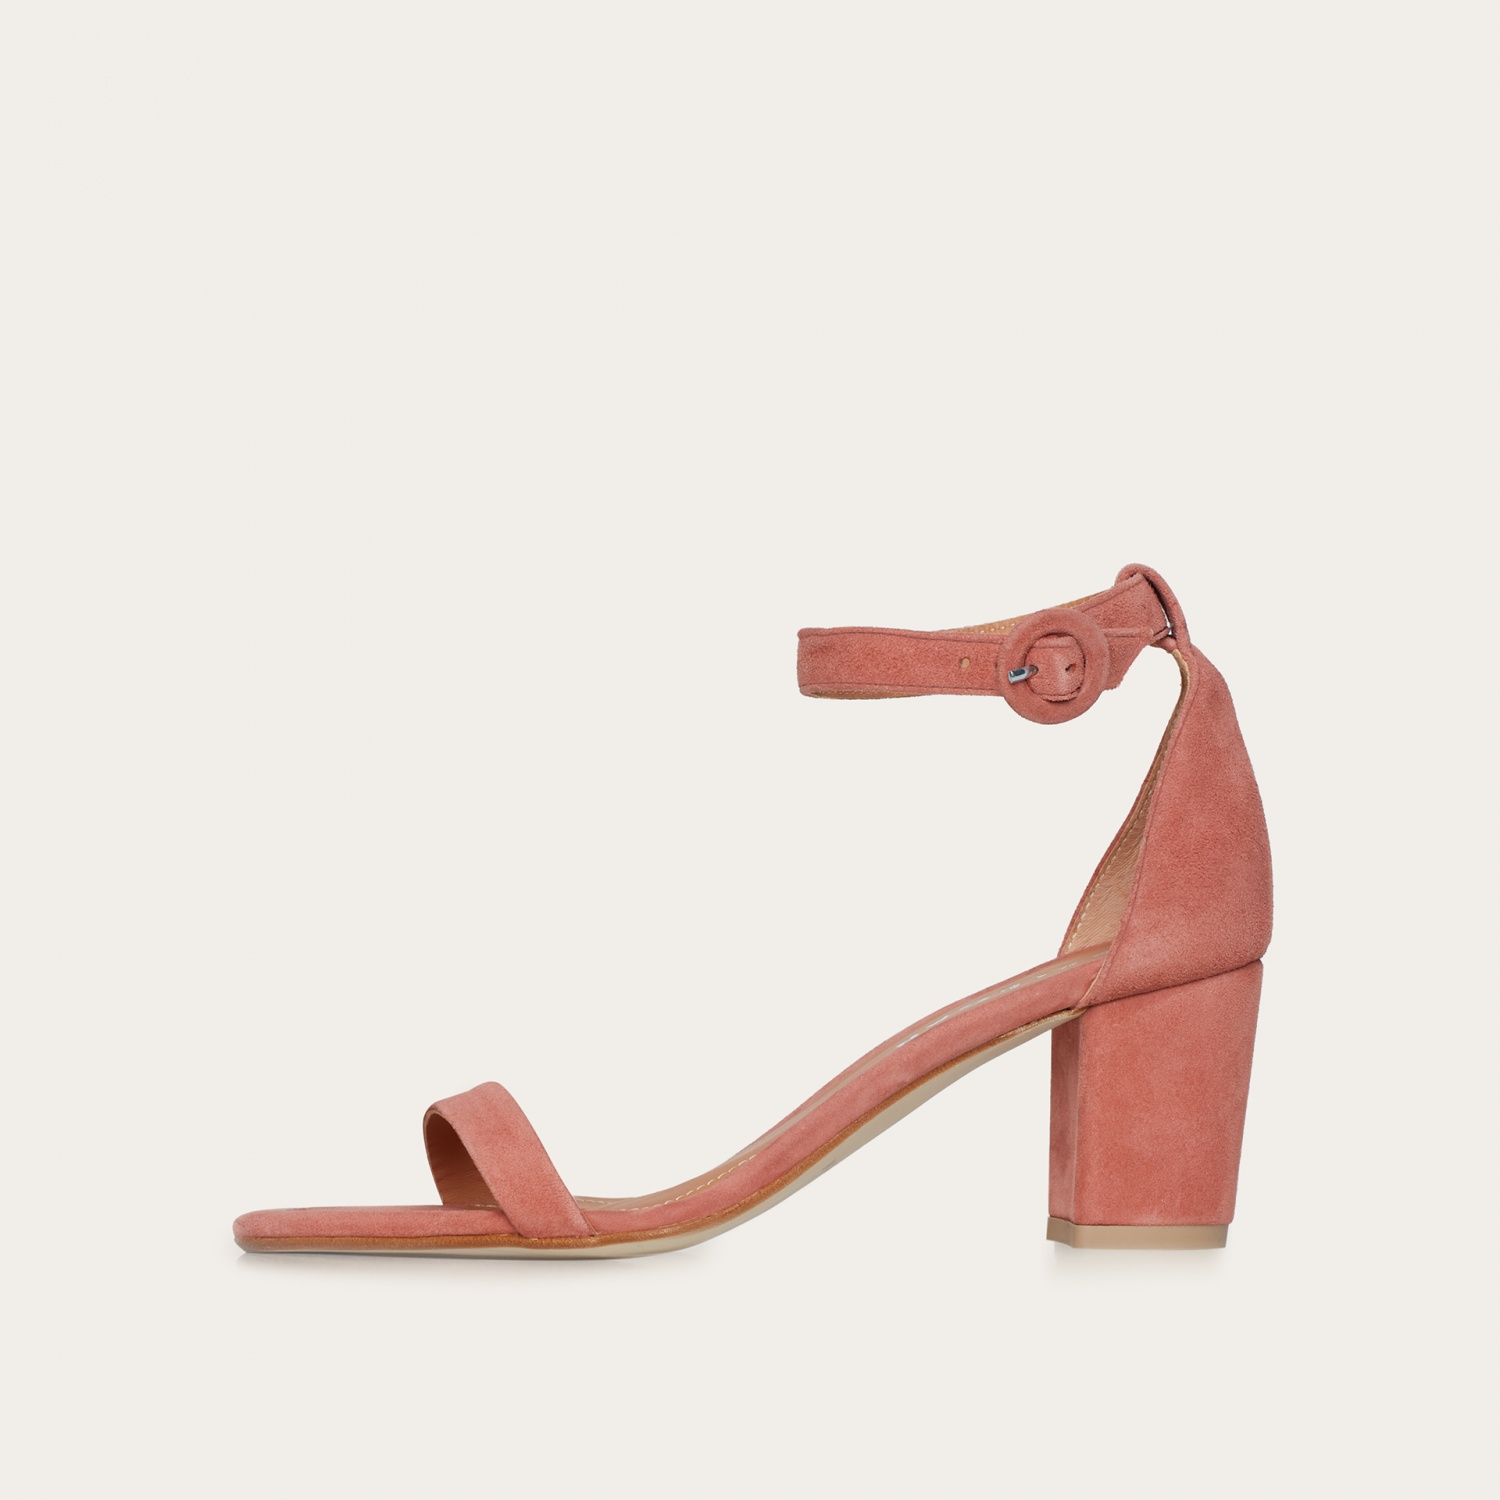 Alexander Wang Abby Mid Heel Sandals In Fluo Coral-36 Brand New | eBay